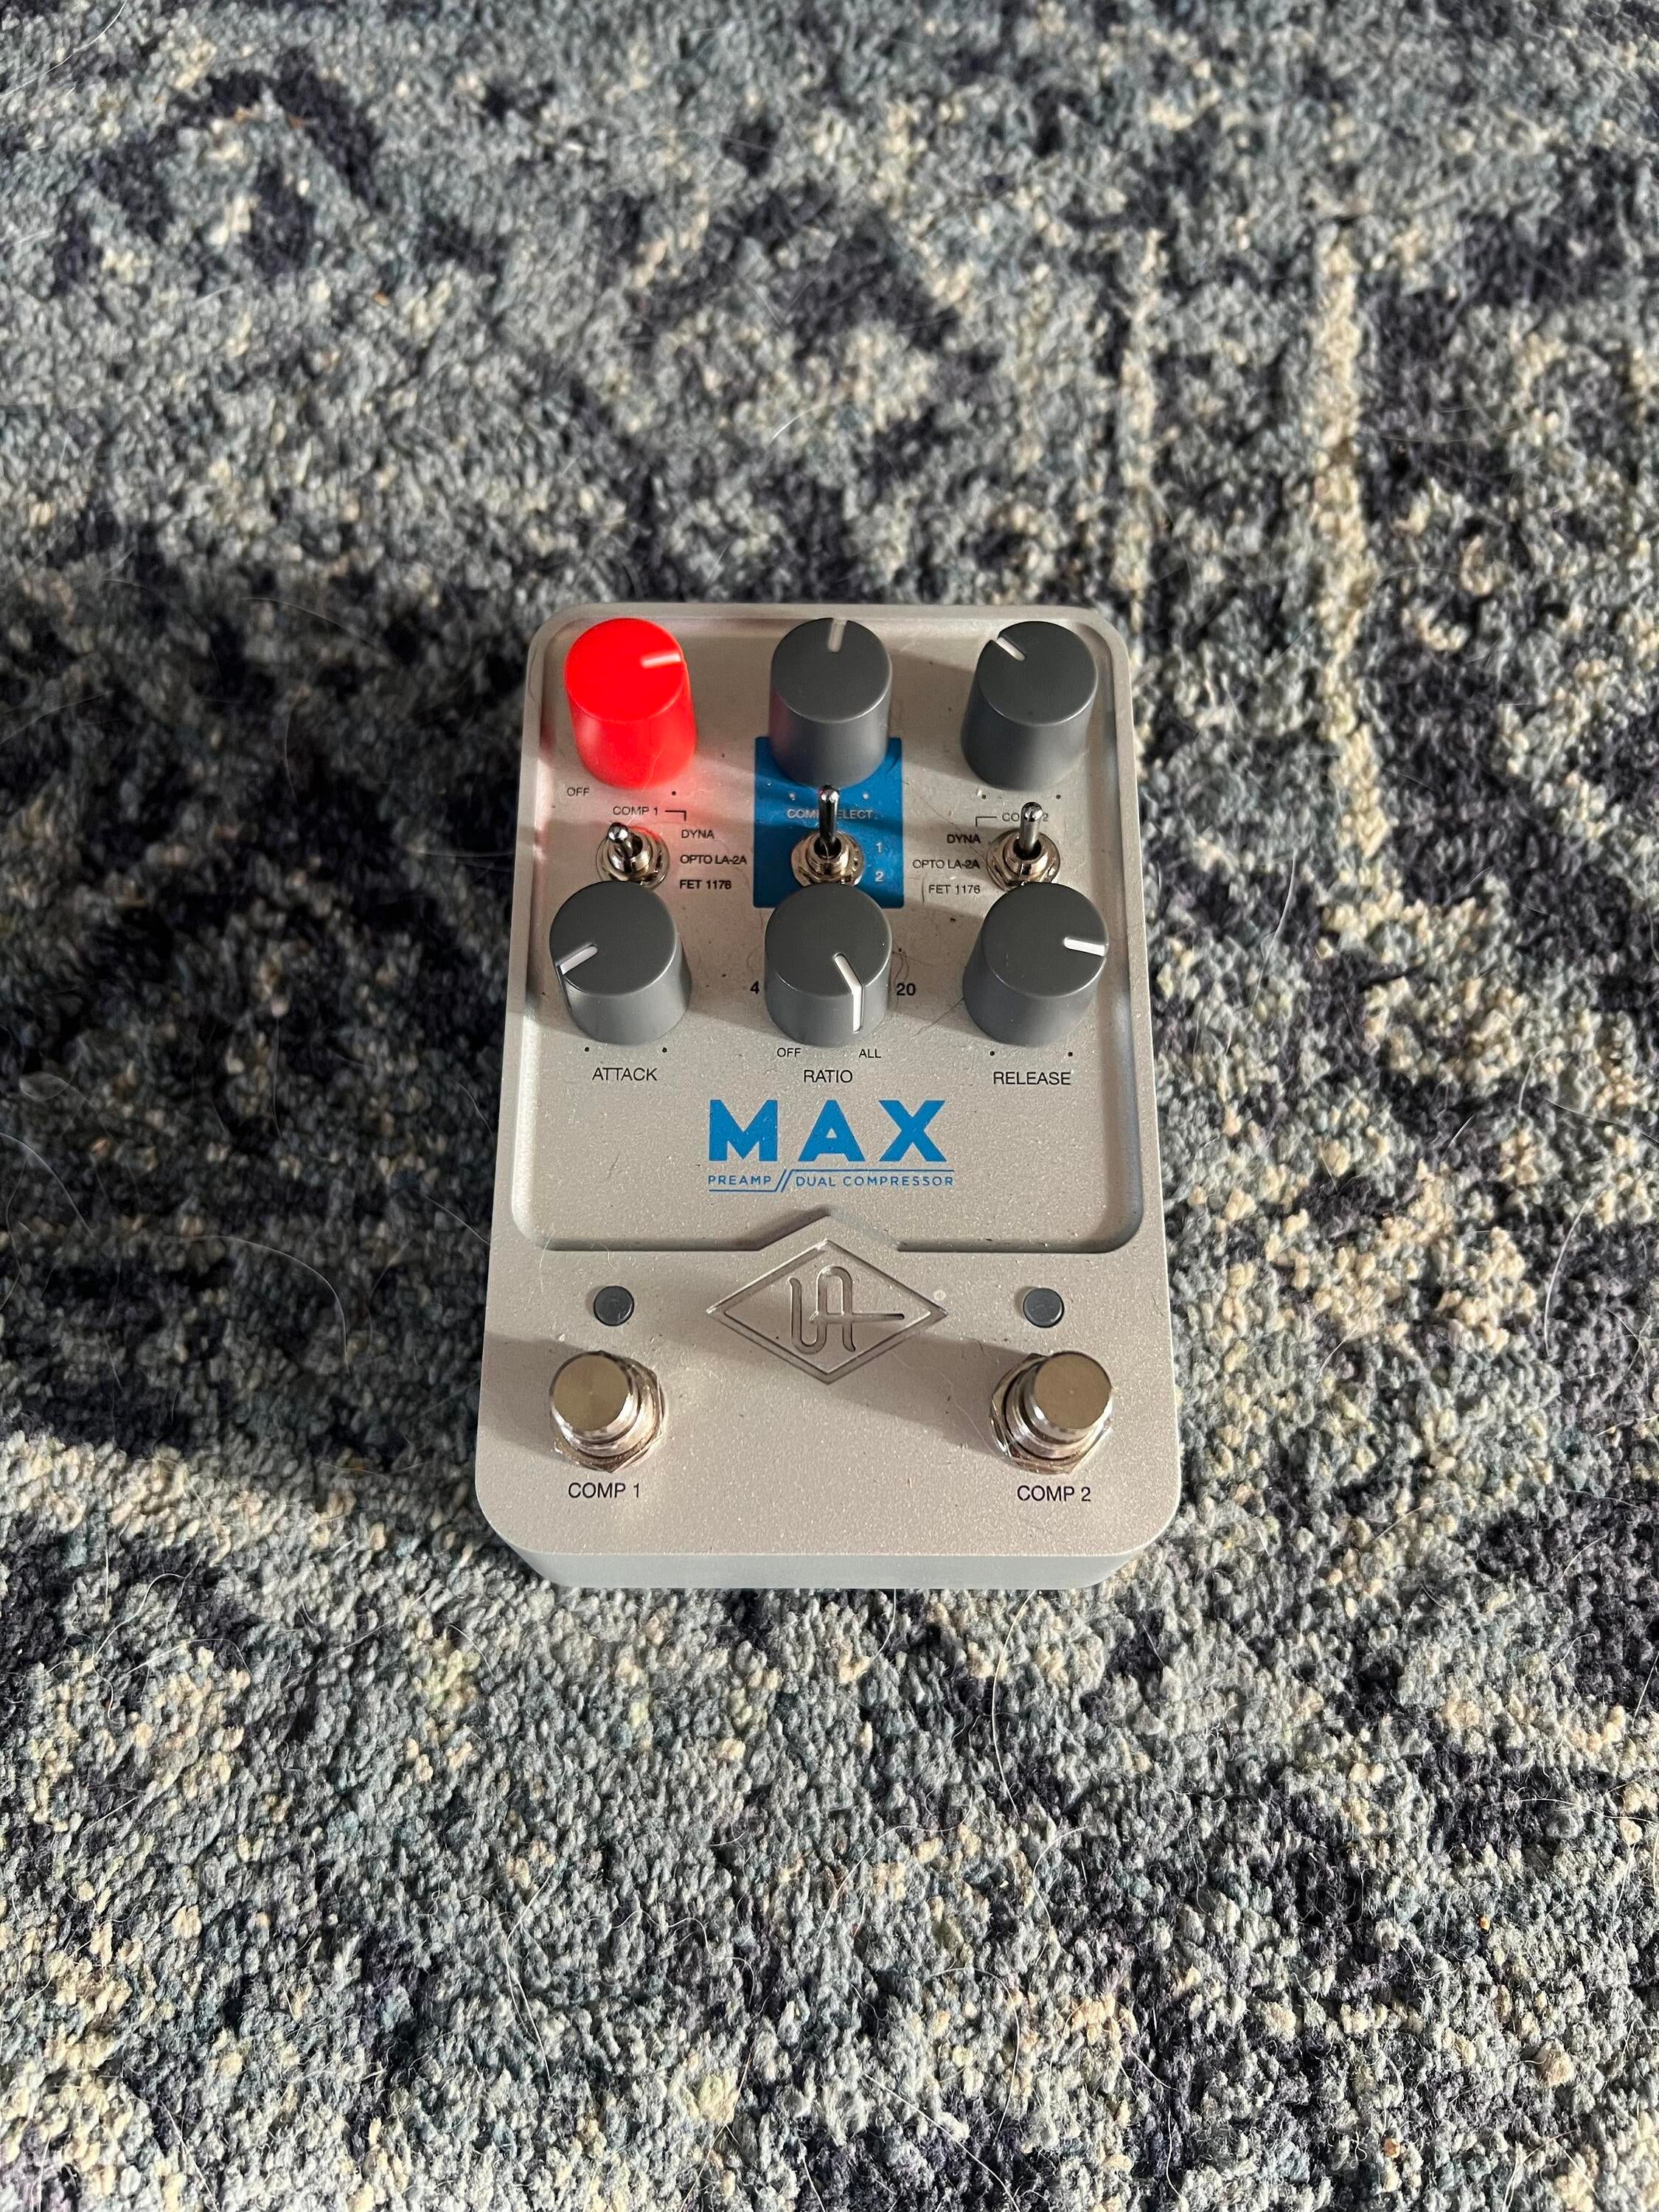 Used Universal Audio Max Preamp and Dual Compressor Pedal